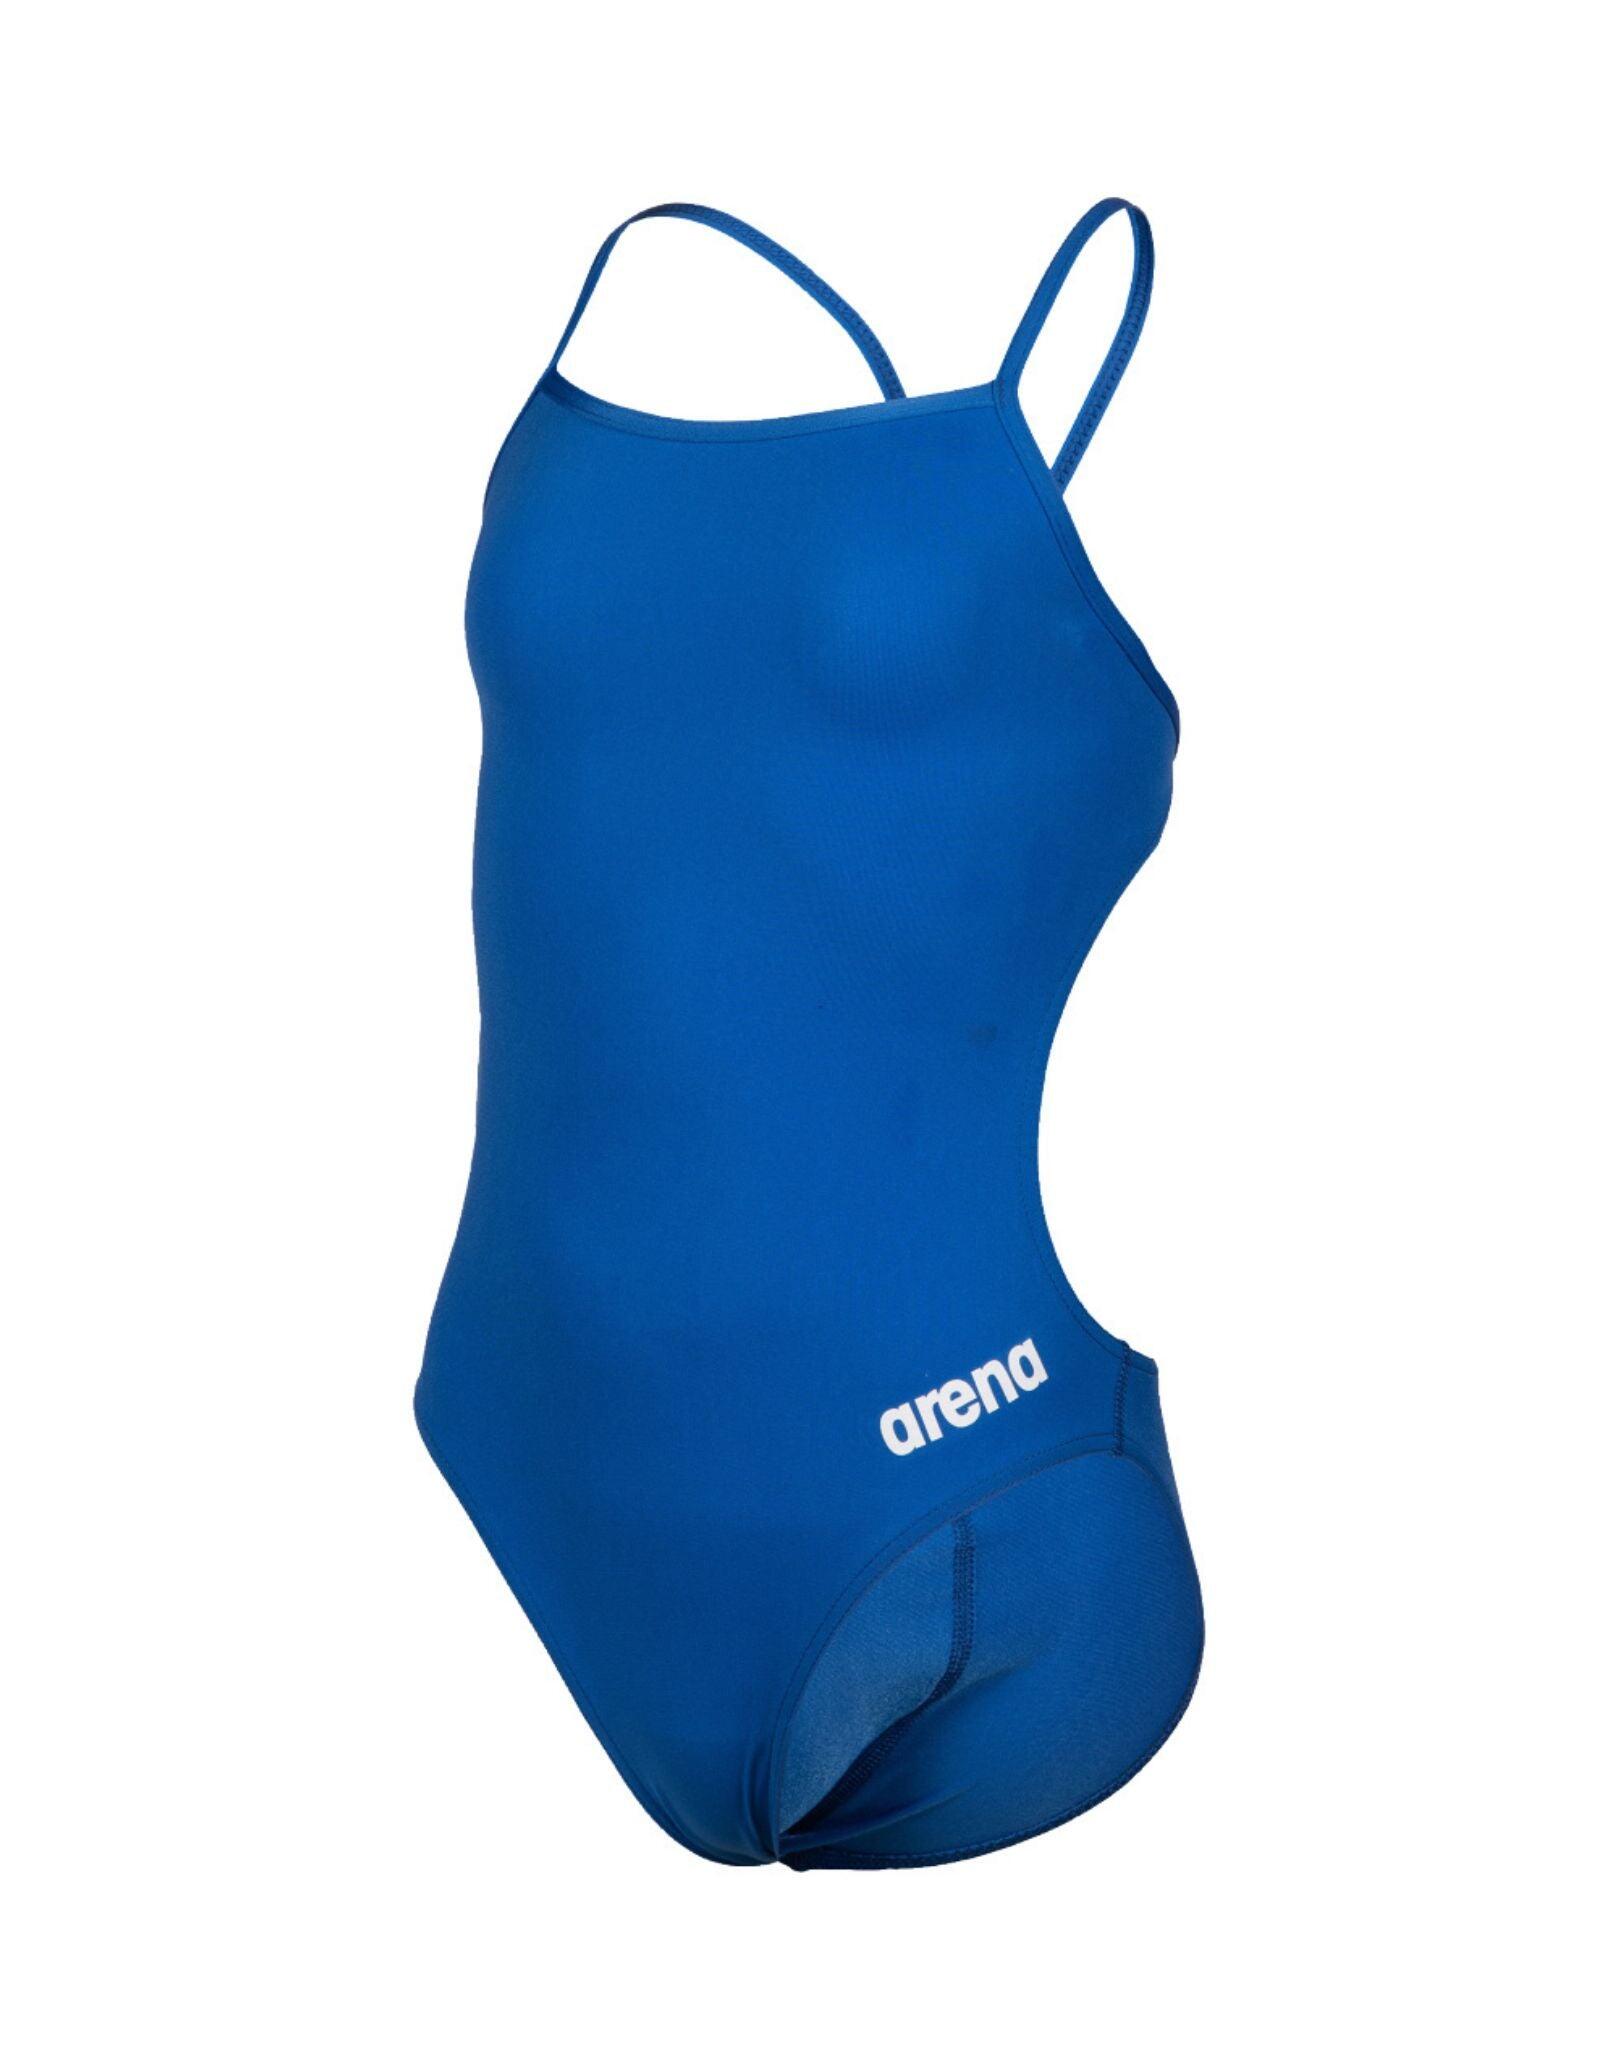 Arena Girls Team Challenge Solid Swimsuit - Royal/White 4/7